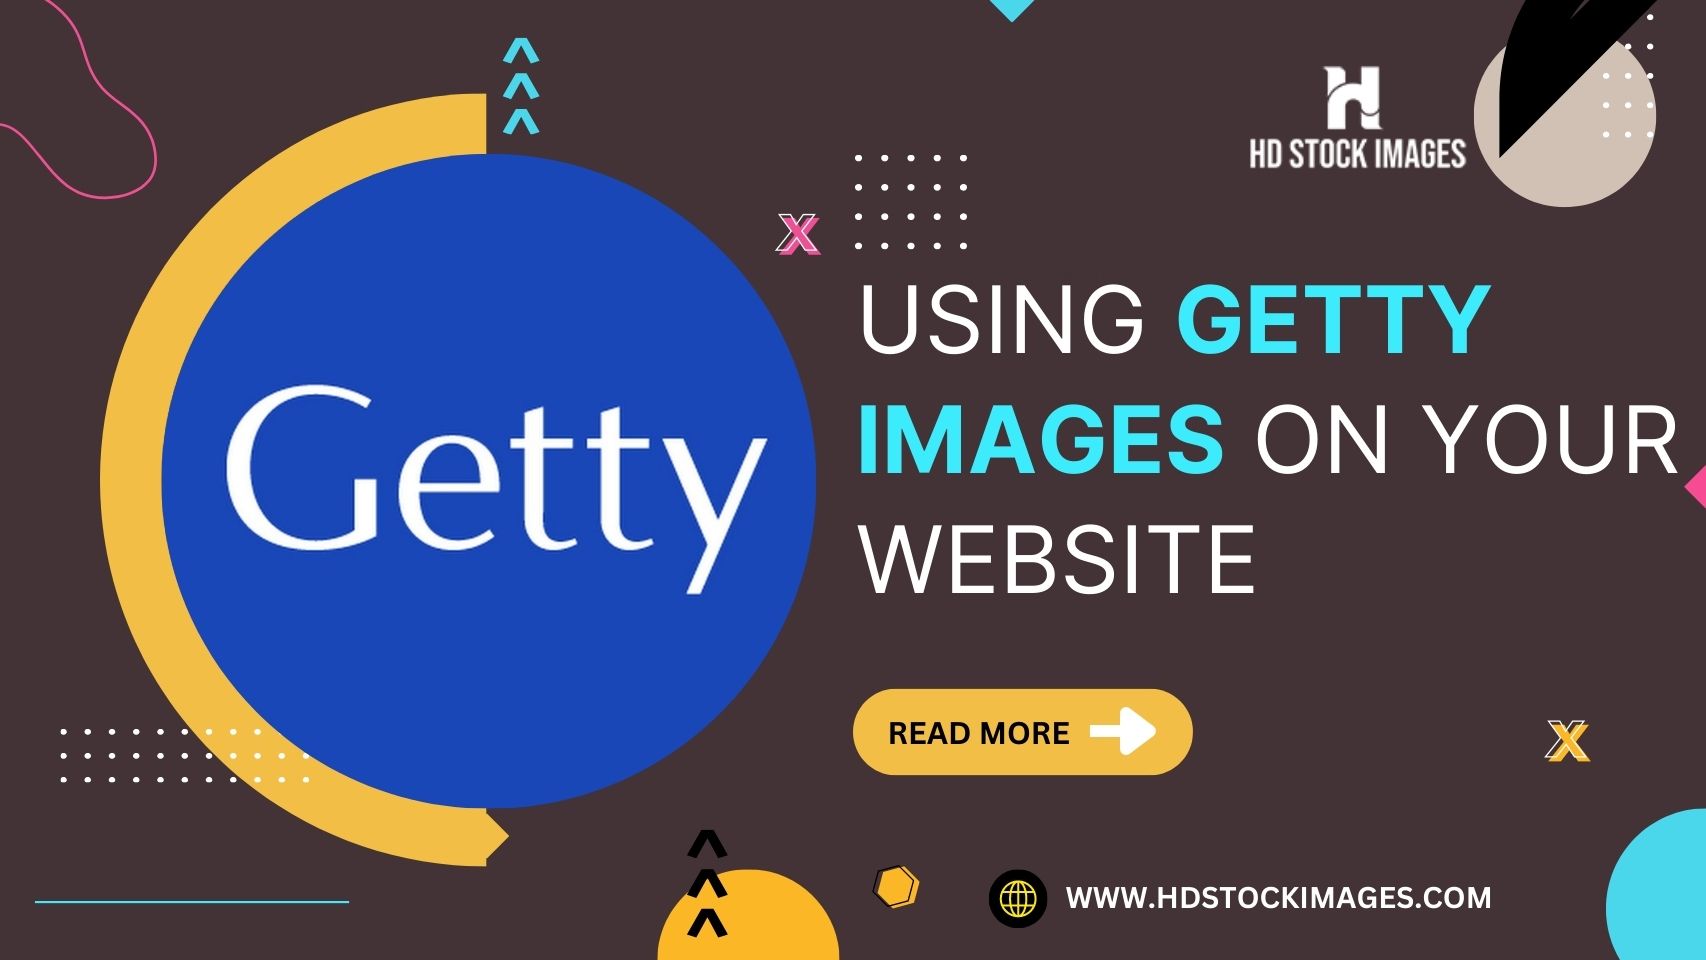 An image of Using Getty Images on your Website